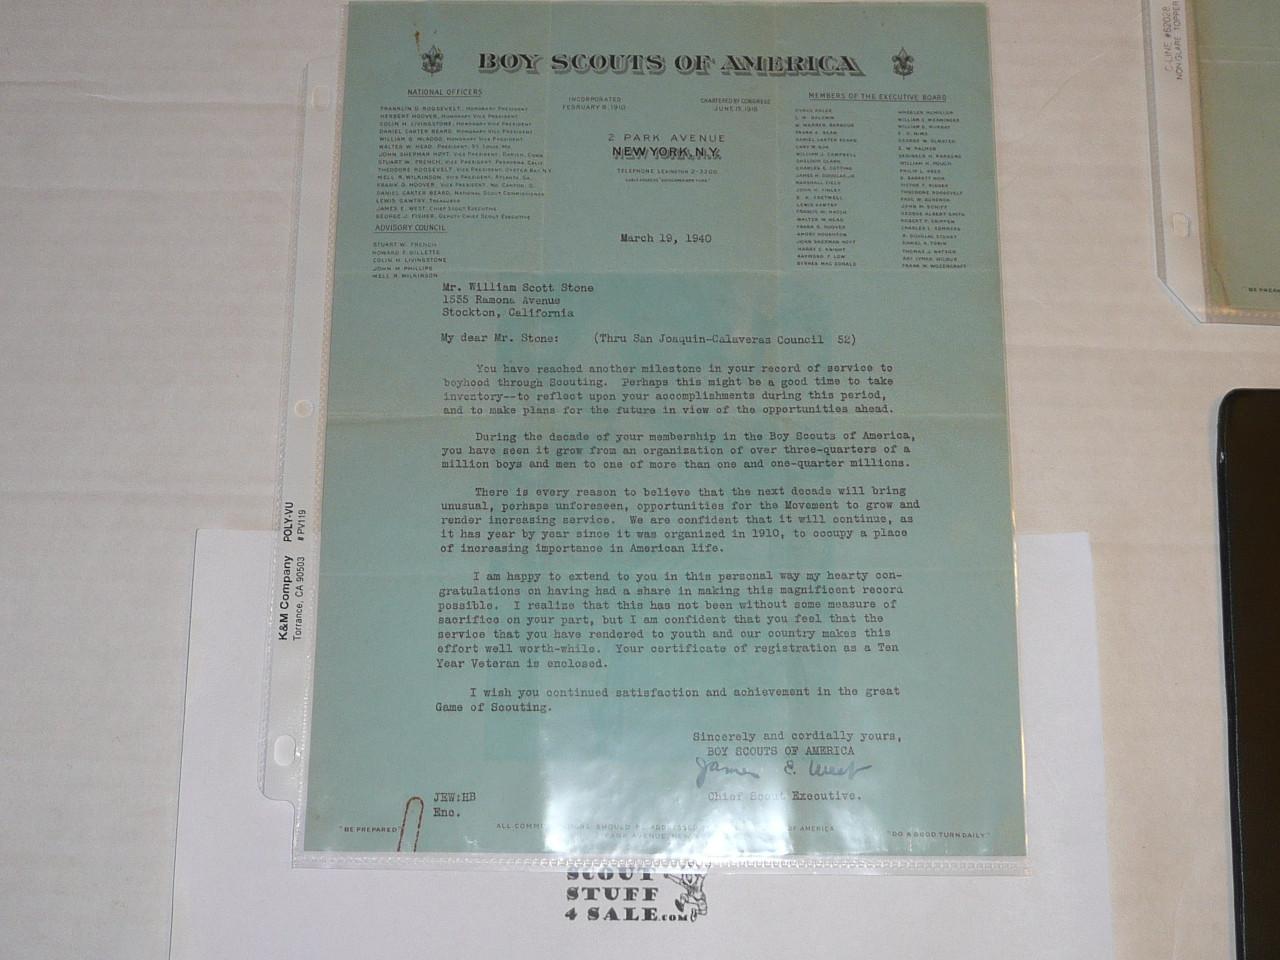 1940 Letter on Boy Scout National Headquarters Stationary From James West to a Scouter